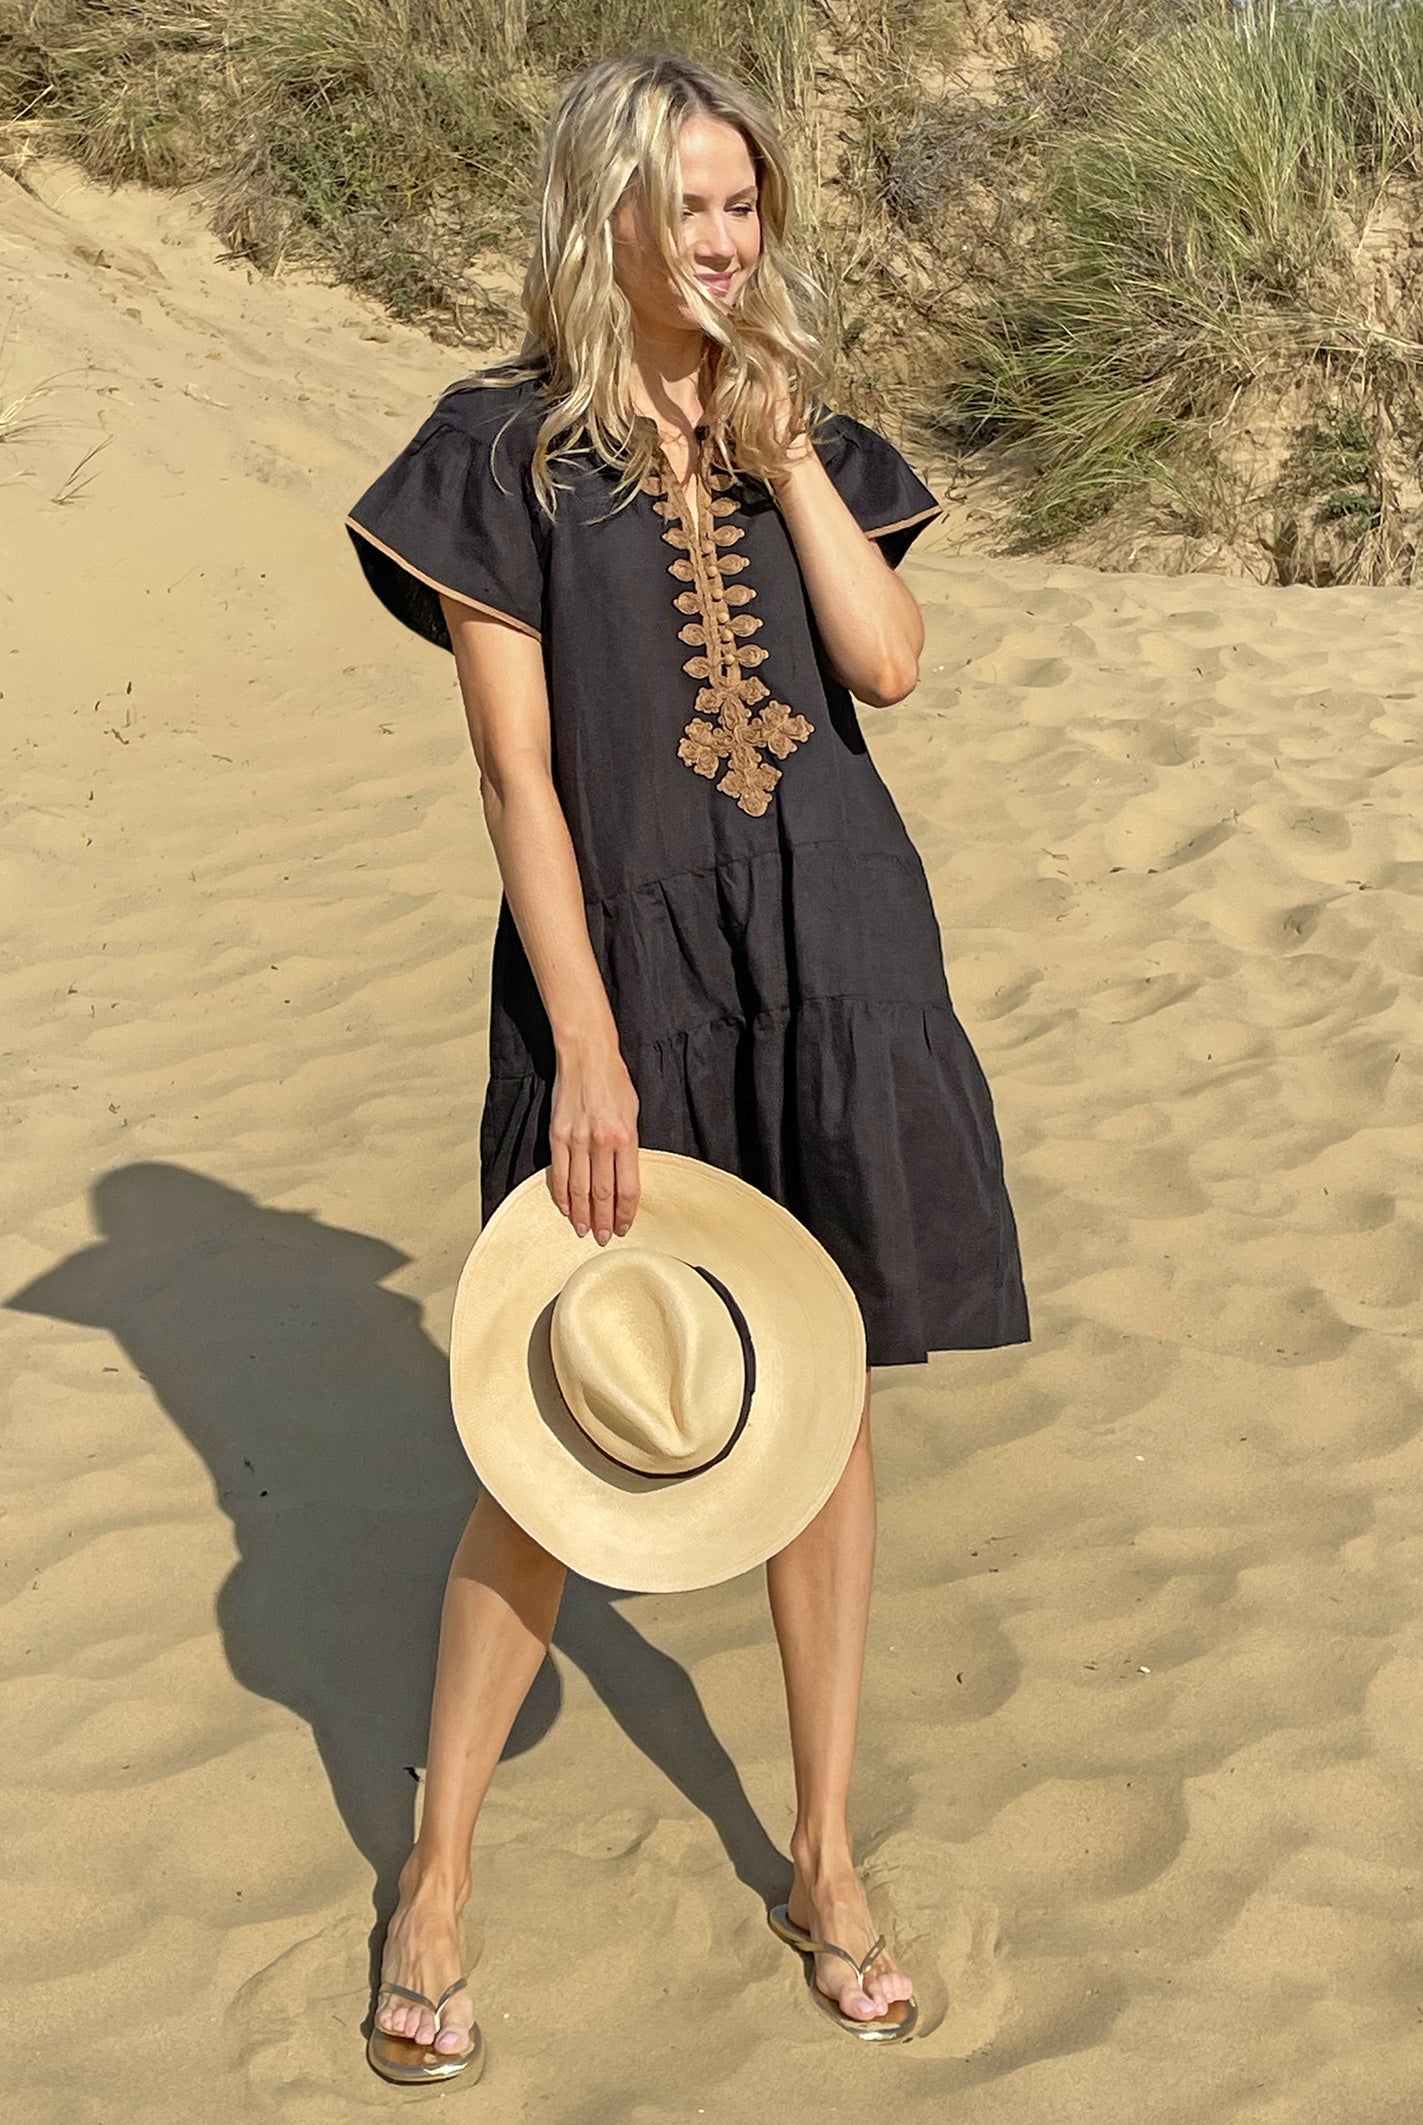 A model on a beach wearing the Rose and Rose Ischia dress in black cotton and holding an Anthony Peto Panama hat.